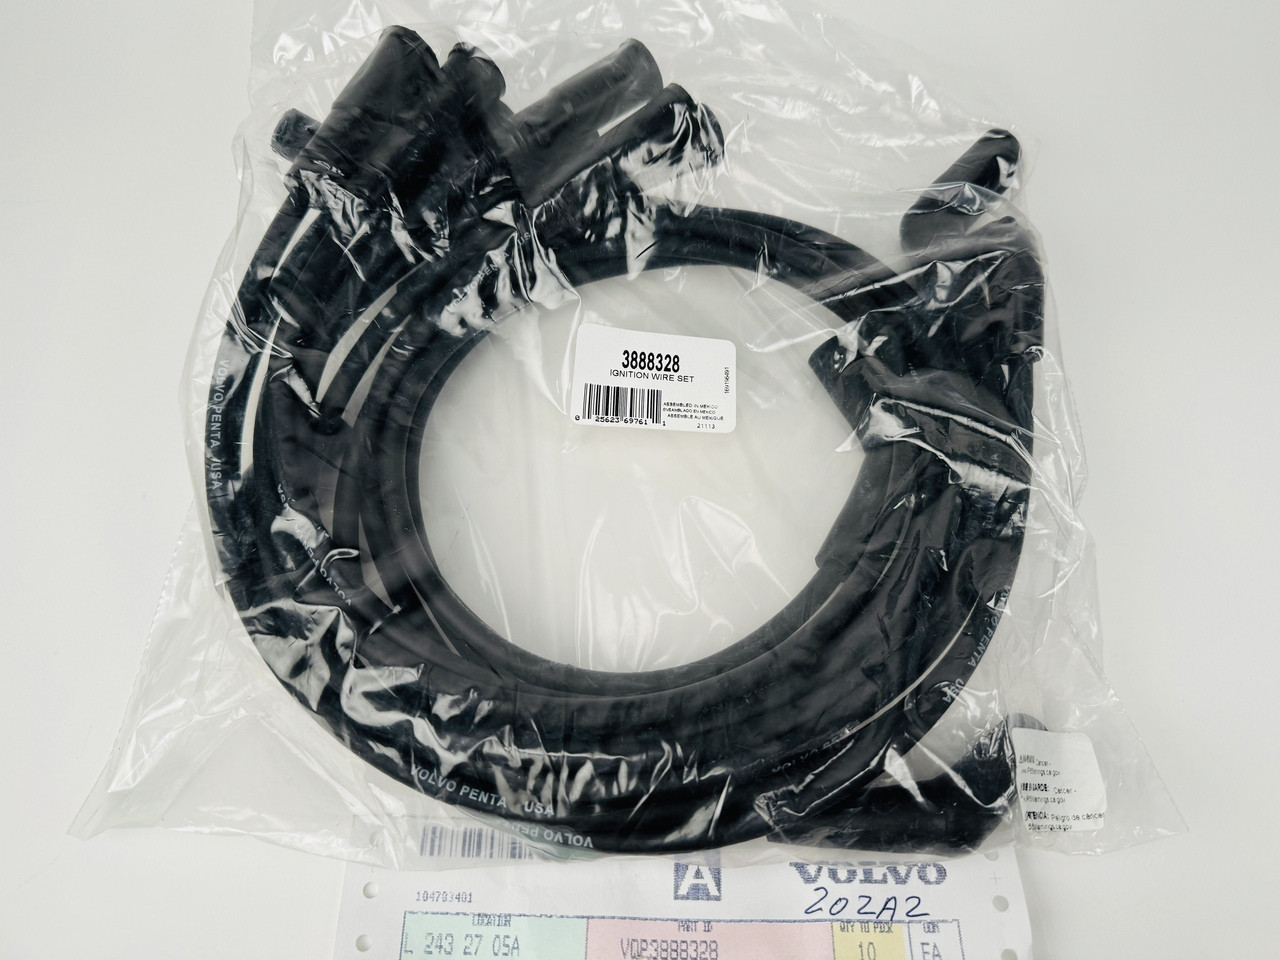 $109.99* GENUINE VOLVO no tax*  IGNITION CABLE KIT 3888328 *In Stock & Ready To Ship